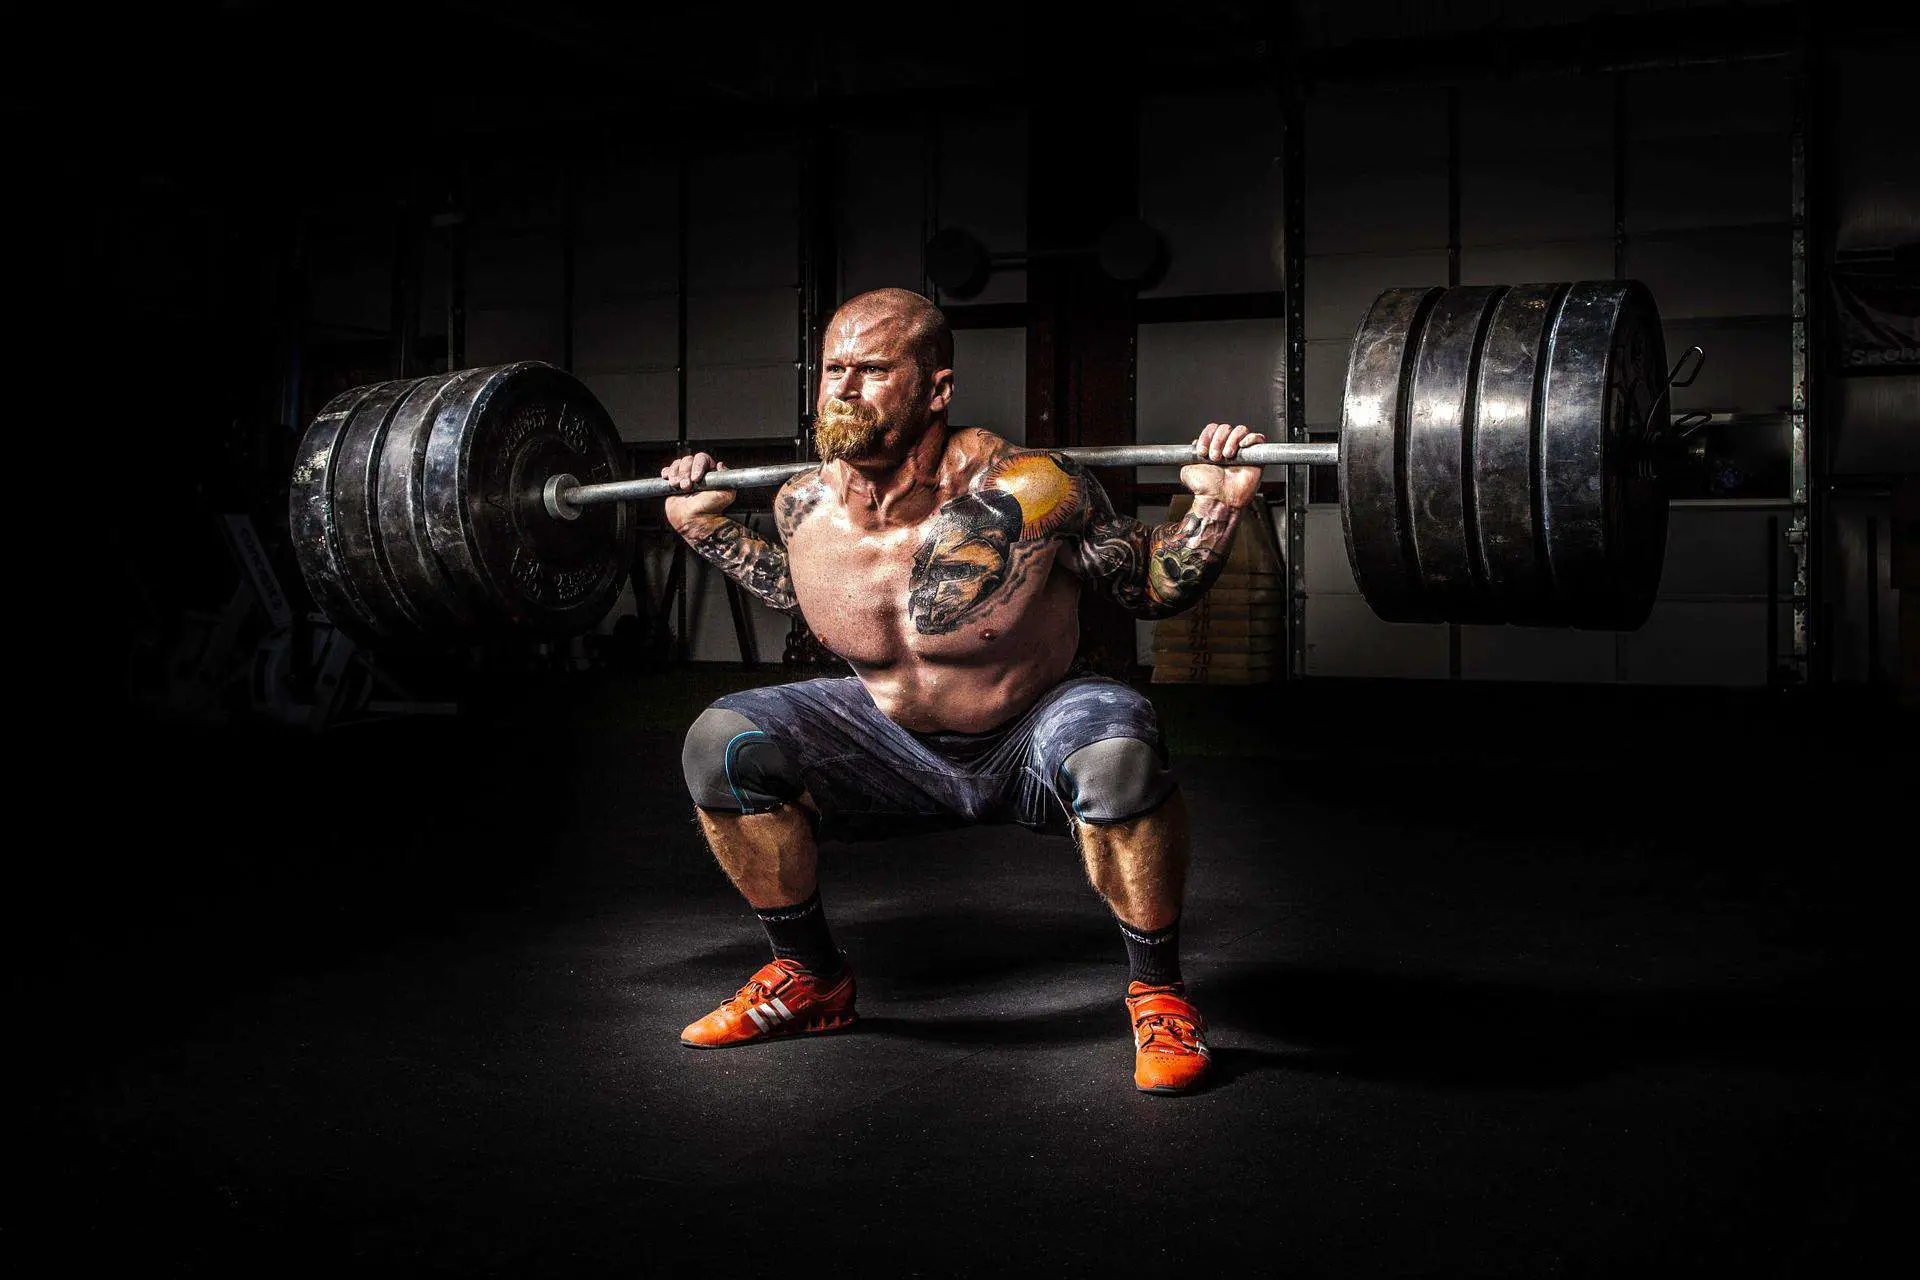 Man with tattoos doing a power squat